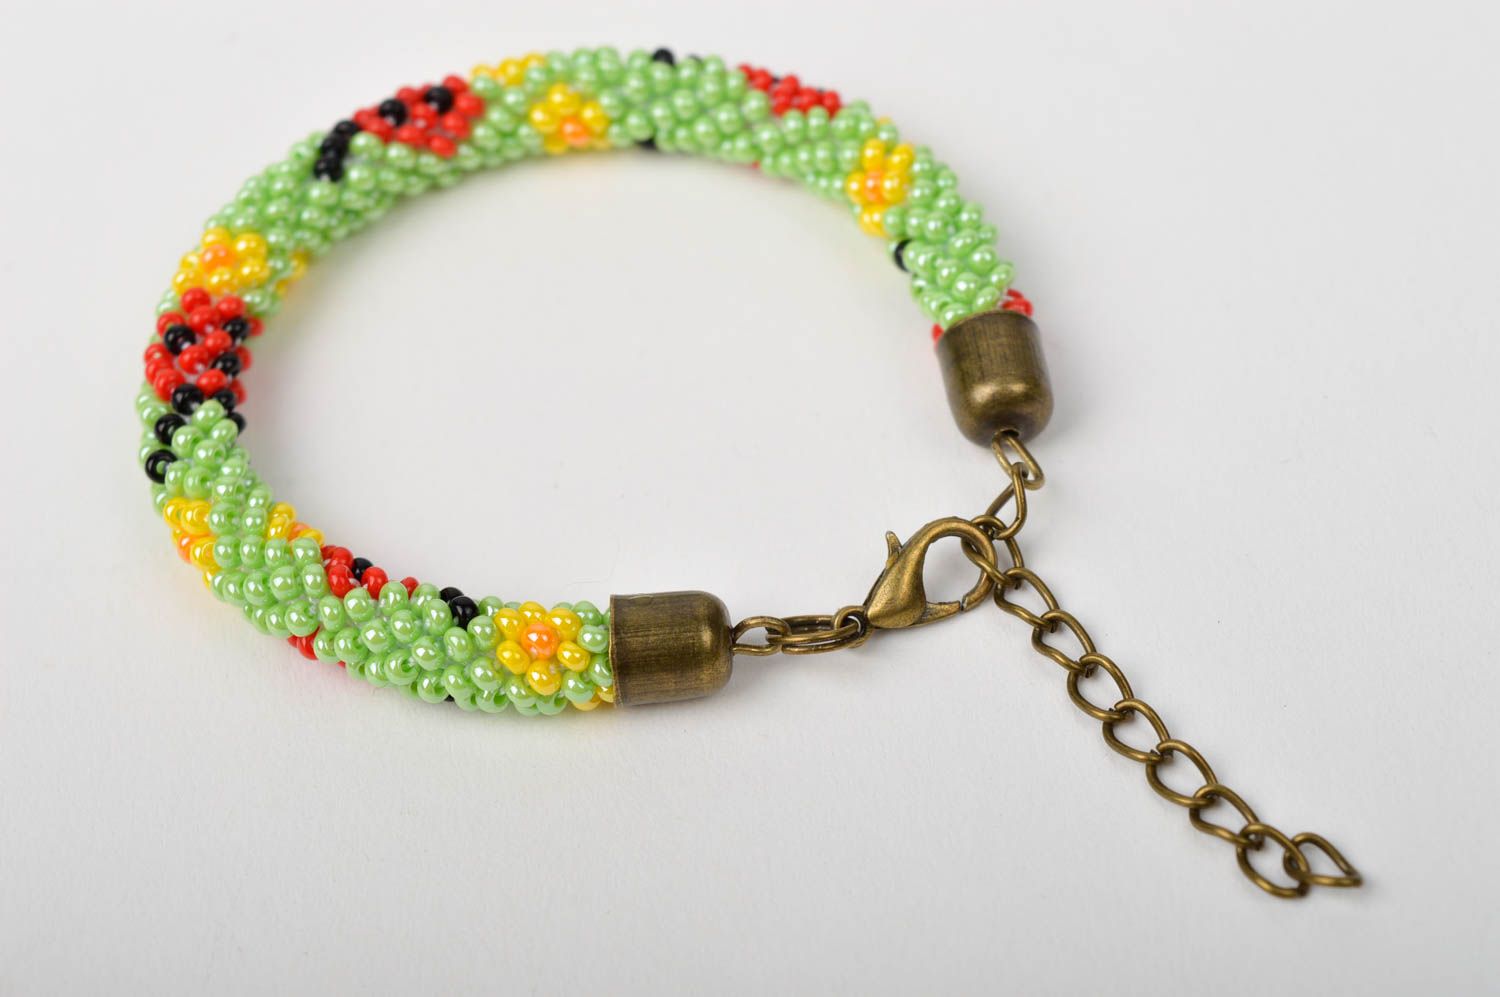 Handmade beaded cord adjustable bracelet in light green, red and black color photo 5